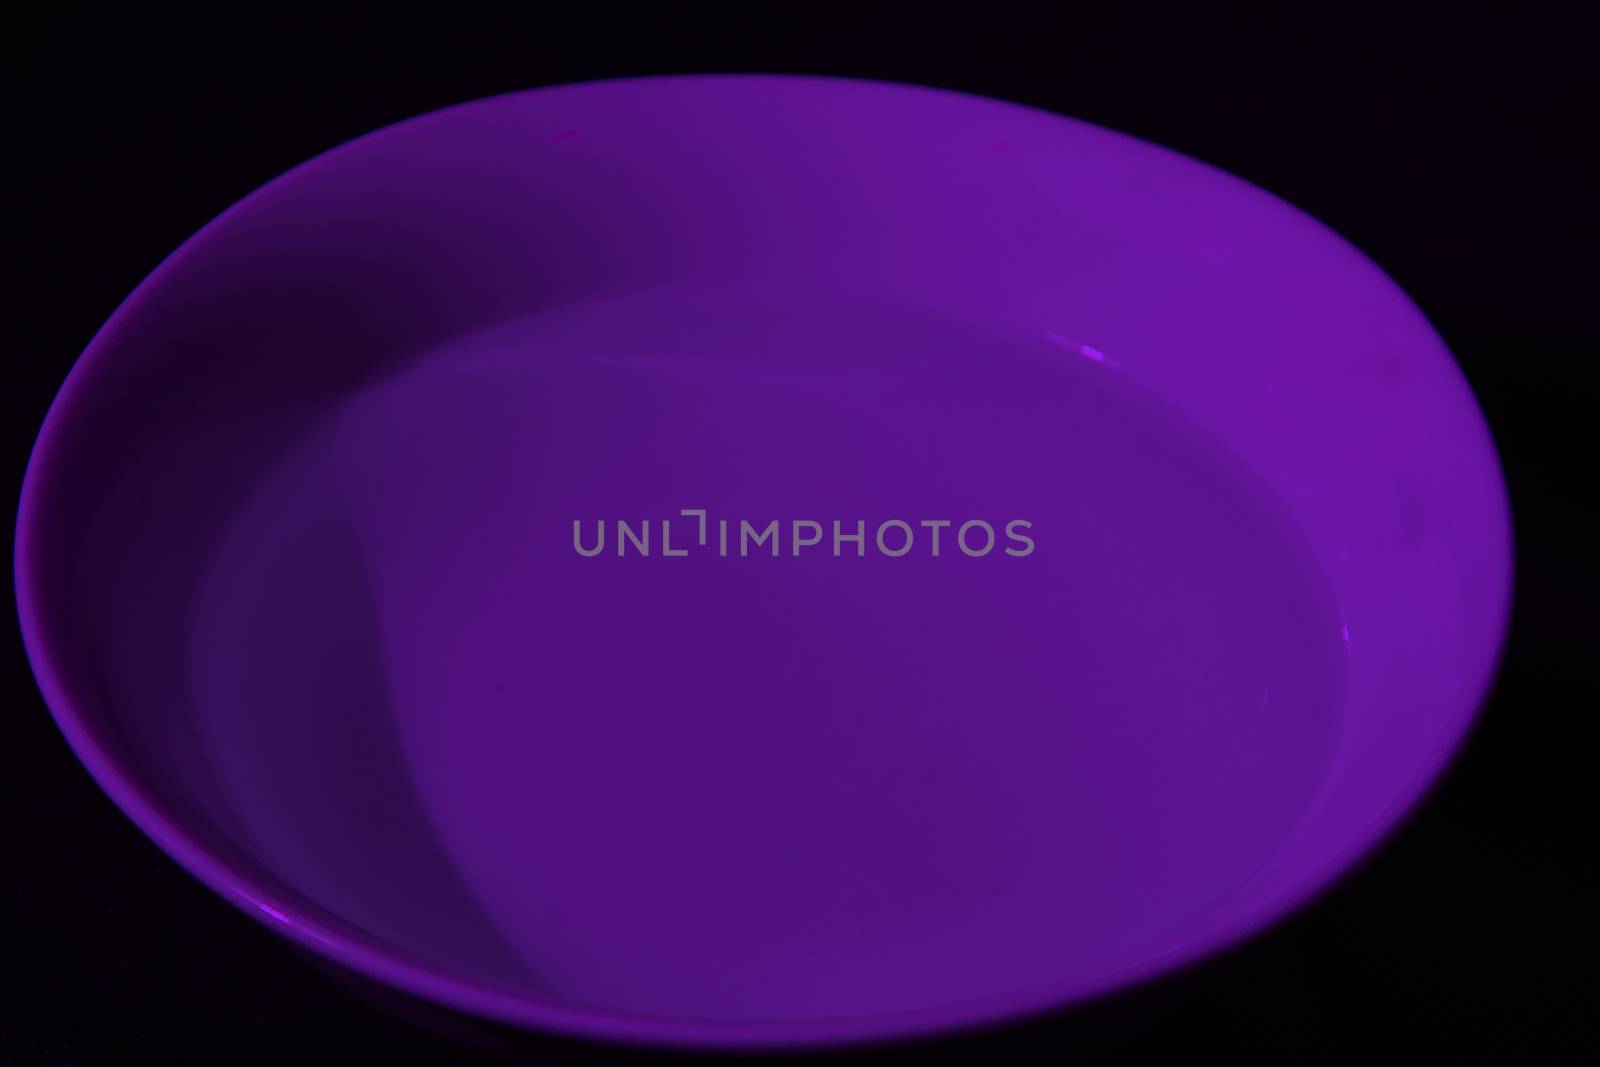 White bowl filled with water on black background by raul_ruiz